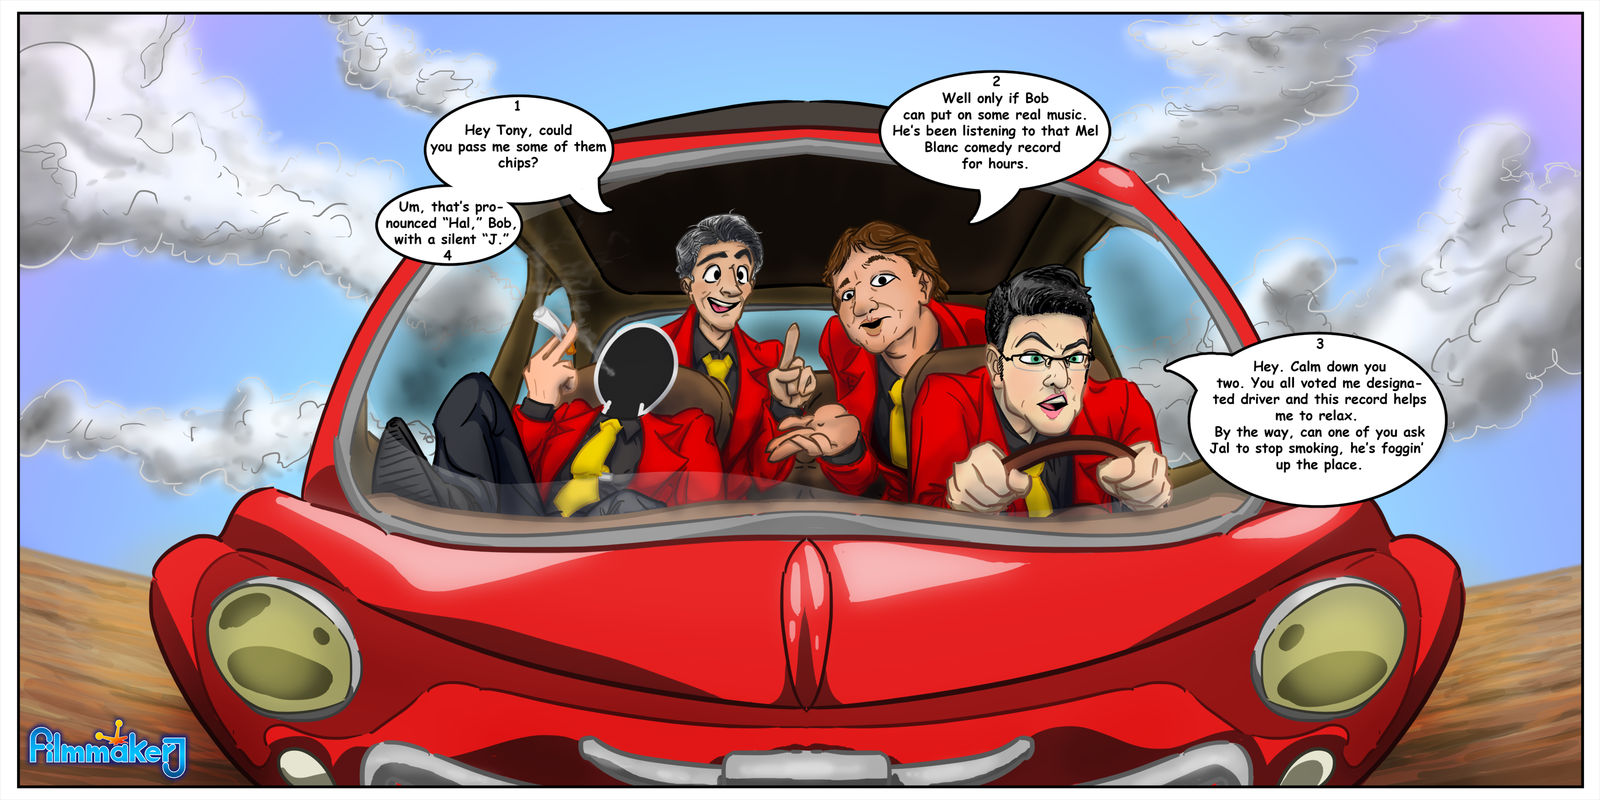 Lupin Voice Actors_driving to Mamo Screening by FilmmakerJ on DeviantArt